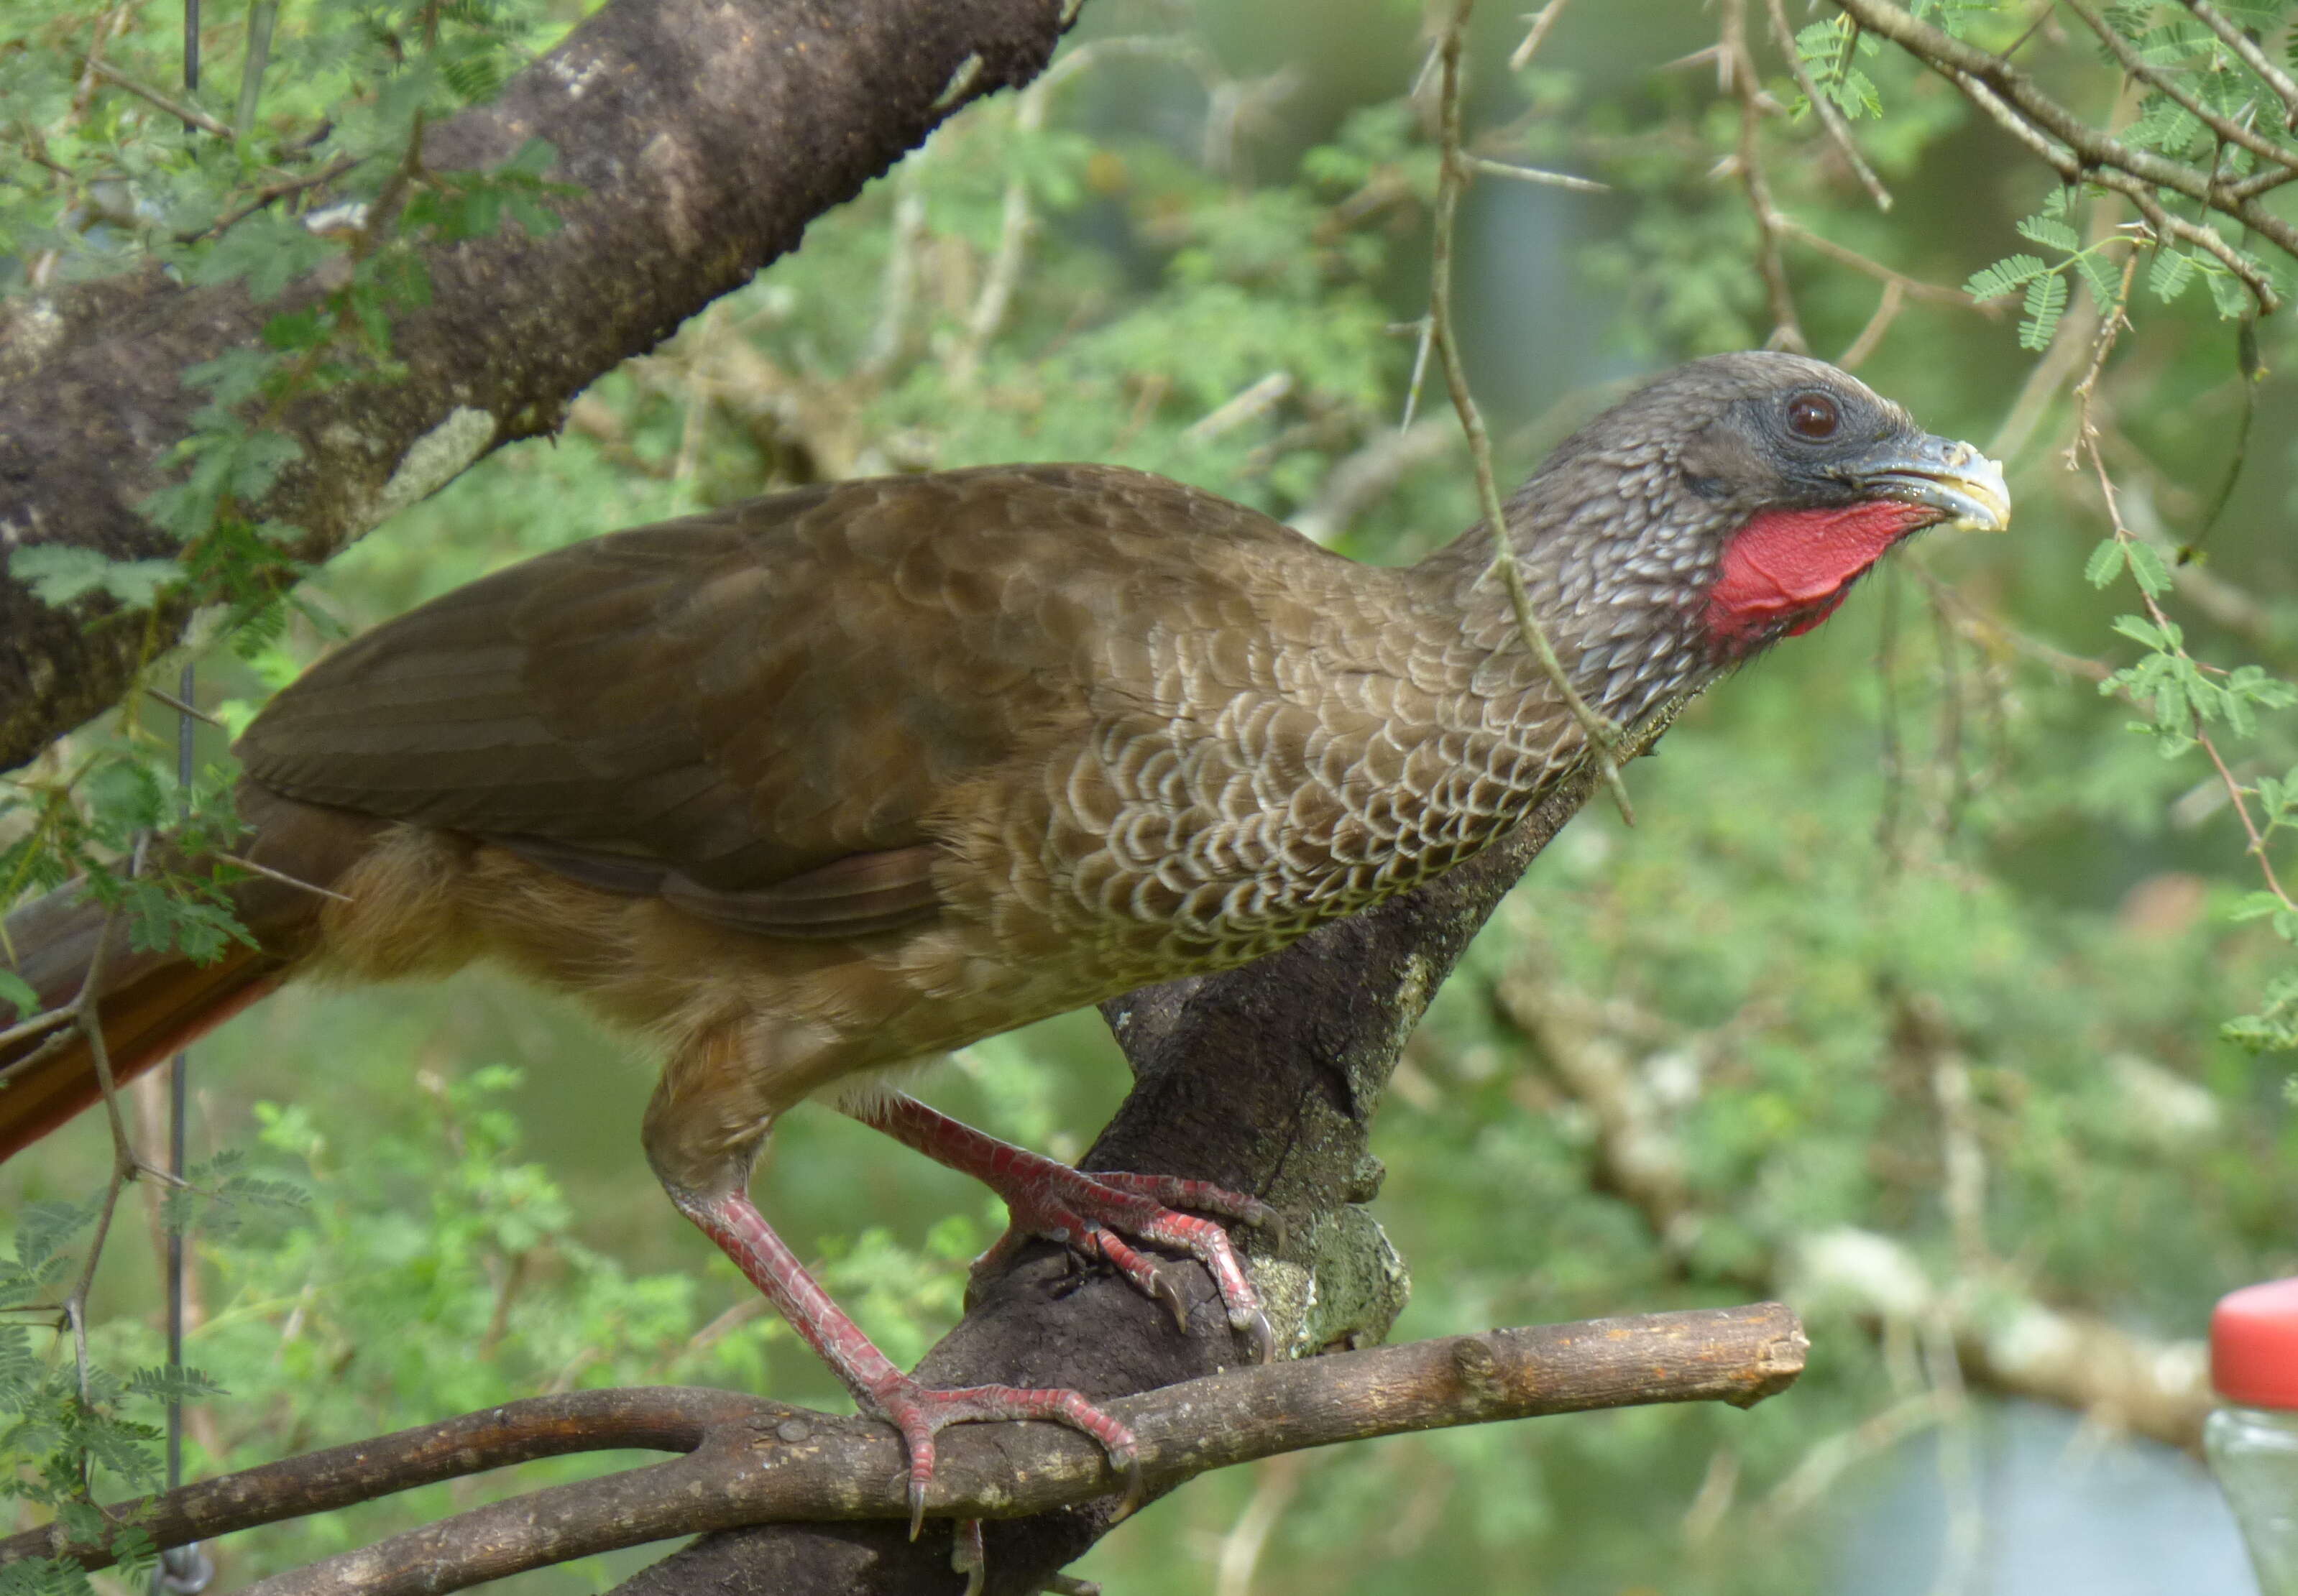 Image of Colombian Chachalaca